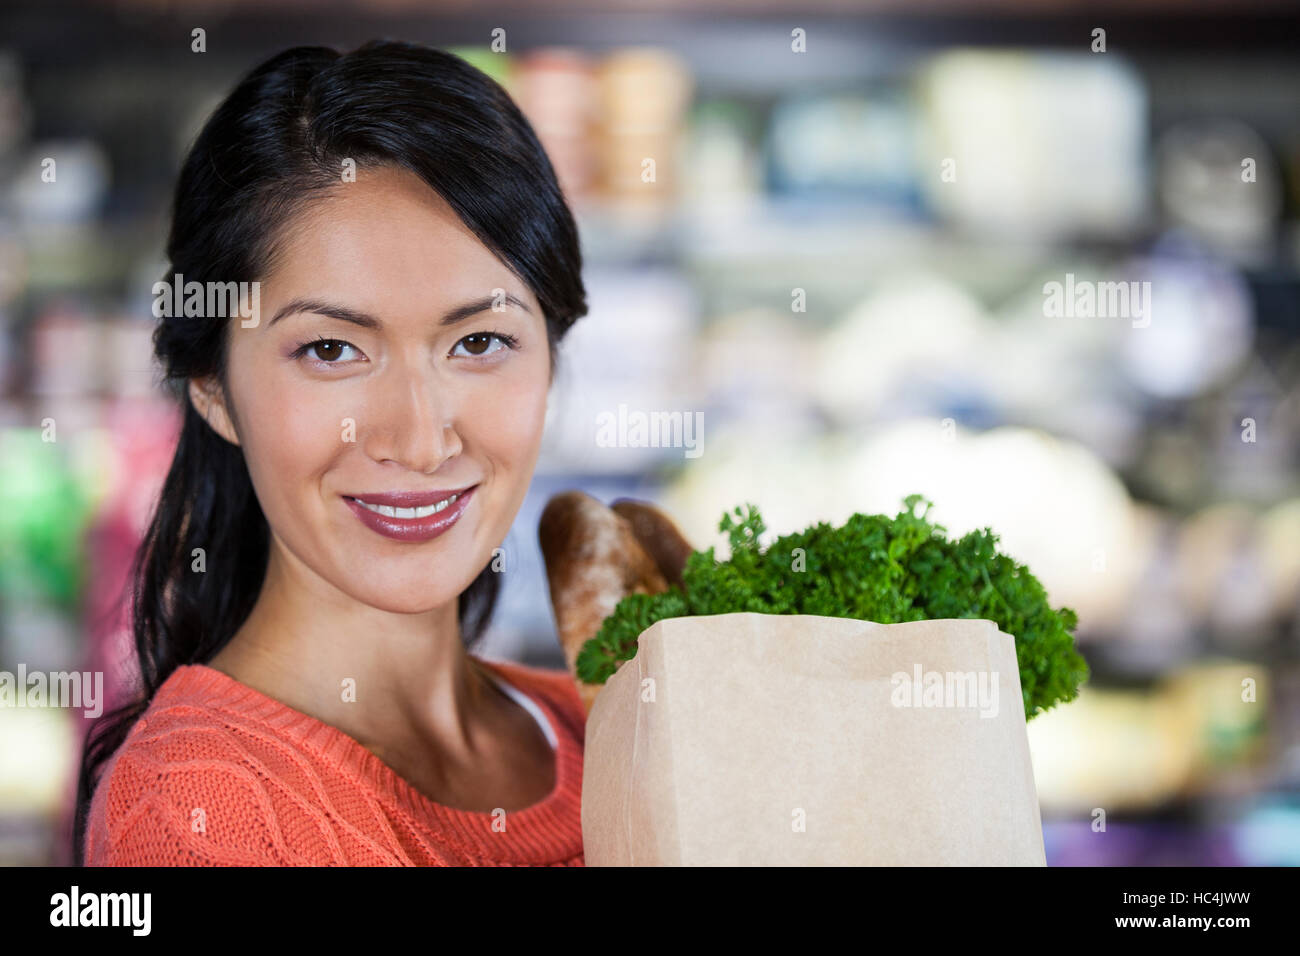 Woman holding groceries in paper bag Stock Photo